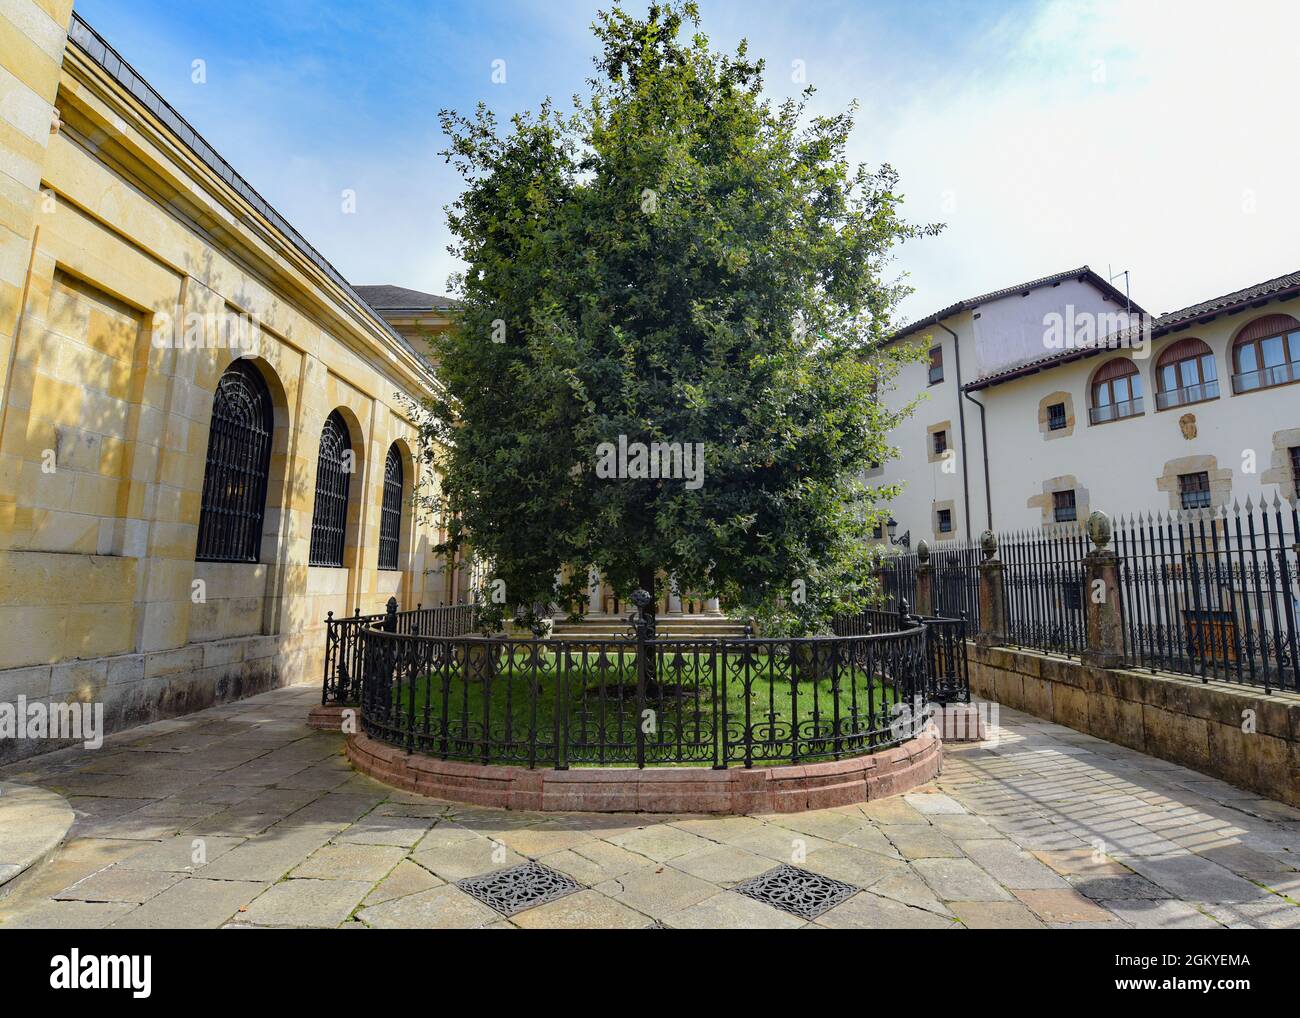 Guernica, Spain - 11 Sept, 2021: The Tree of Guernica (Gernika), Basque Country. Stock Photo